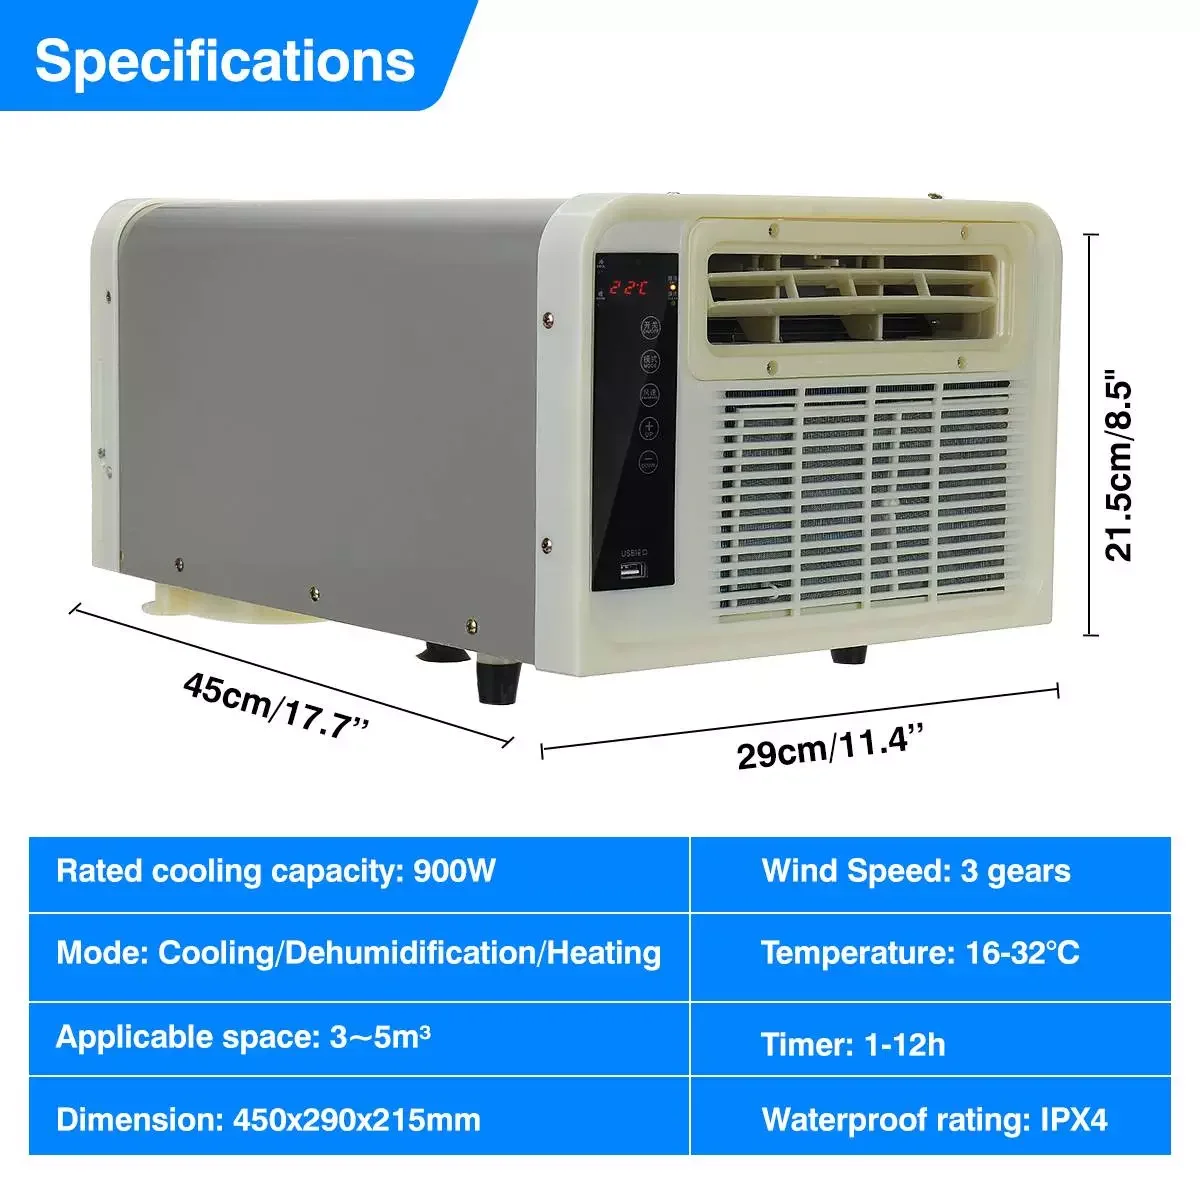 Home Room Dormitory Desktop Air Conditioner 12H Timer Cold/Heat Remote Control Portable Window Air Conditioning Air Cooler 220V enlarge